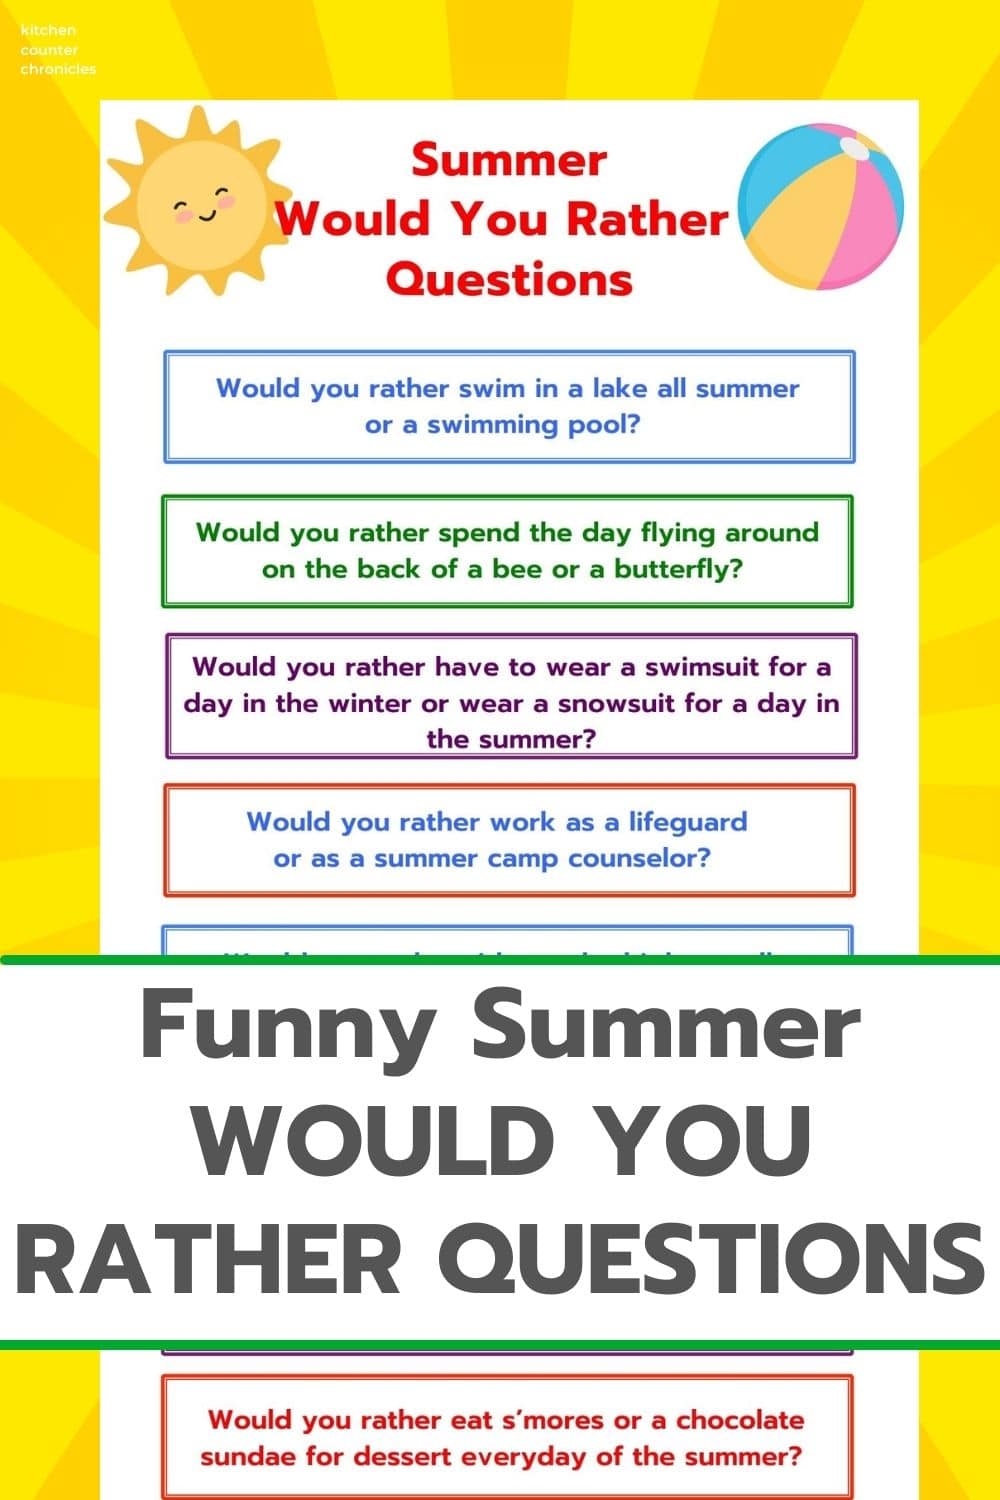 summer would you rather questions printed on a yellow background with title